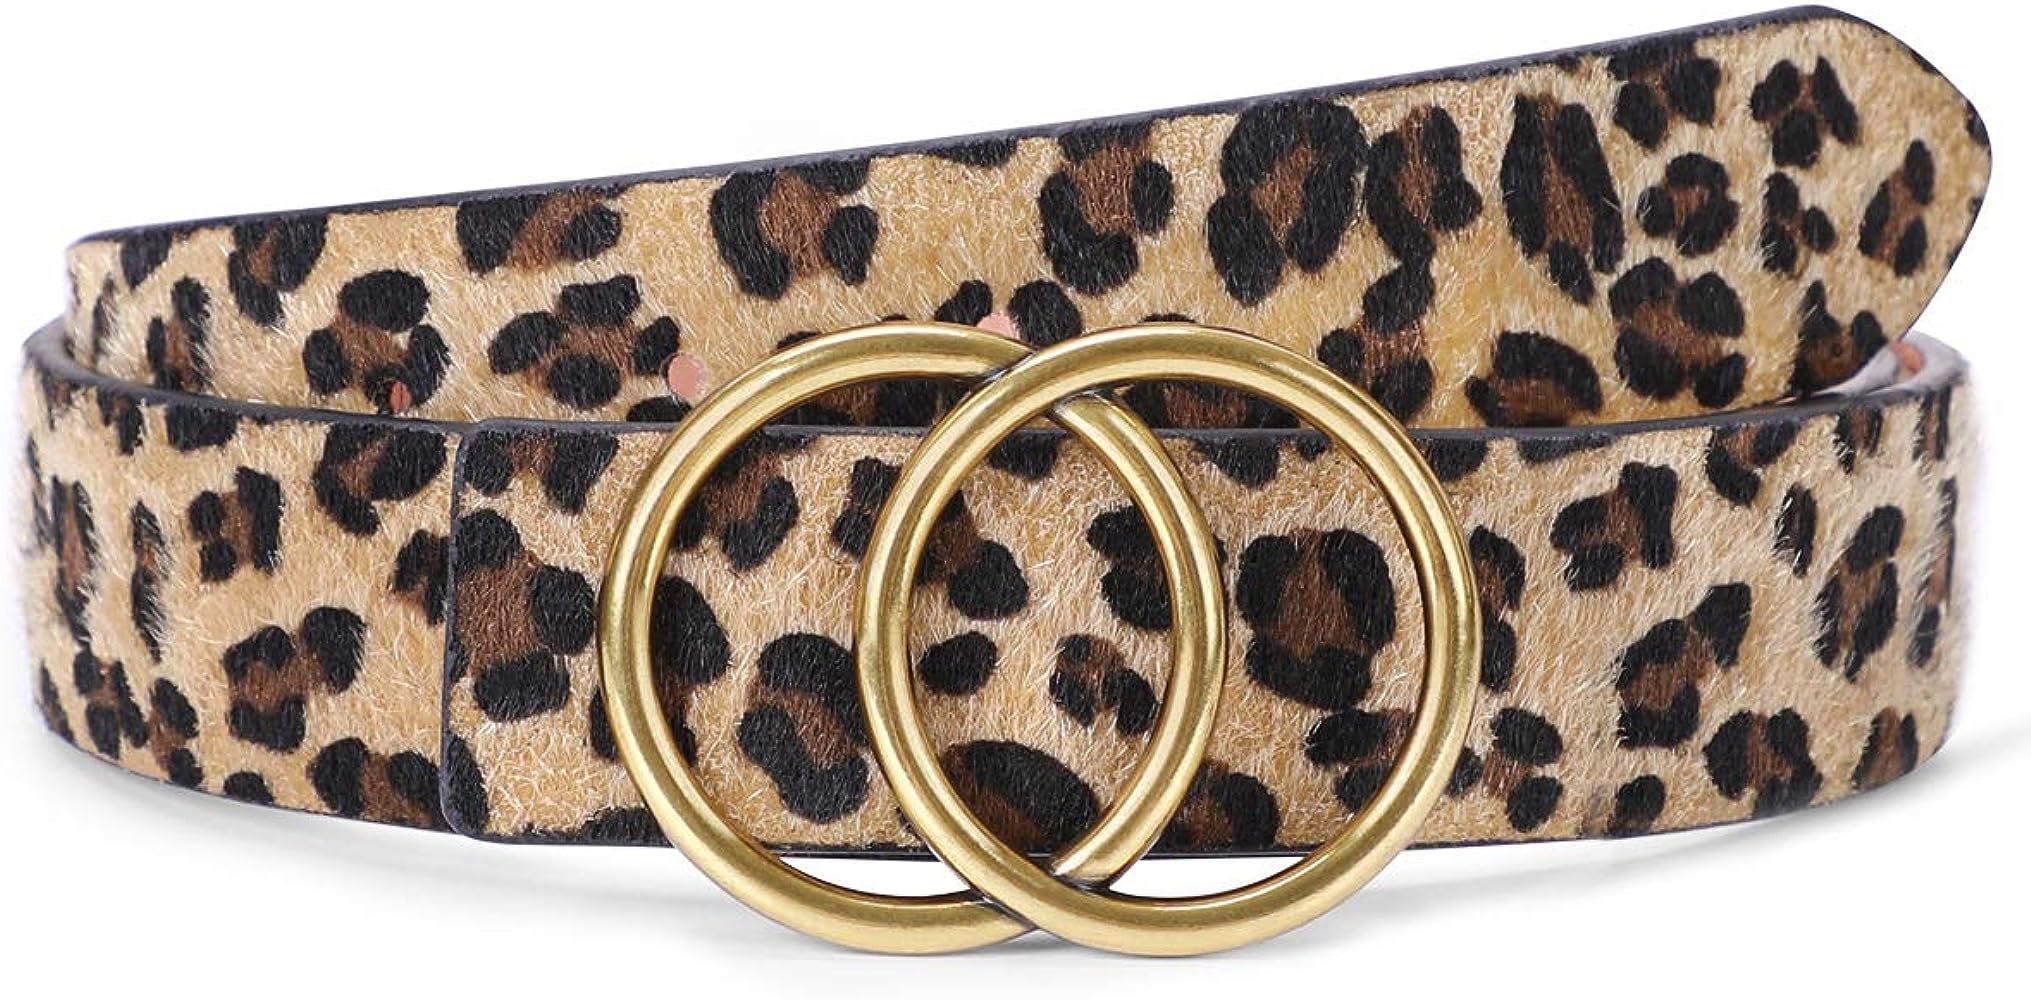 Women's Leopard Print Leather Belt for Jeans Dresses Fashion Waist Belt with Gold Double Ring Buc... | Amazon (US)